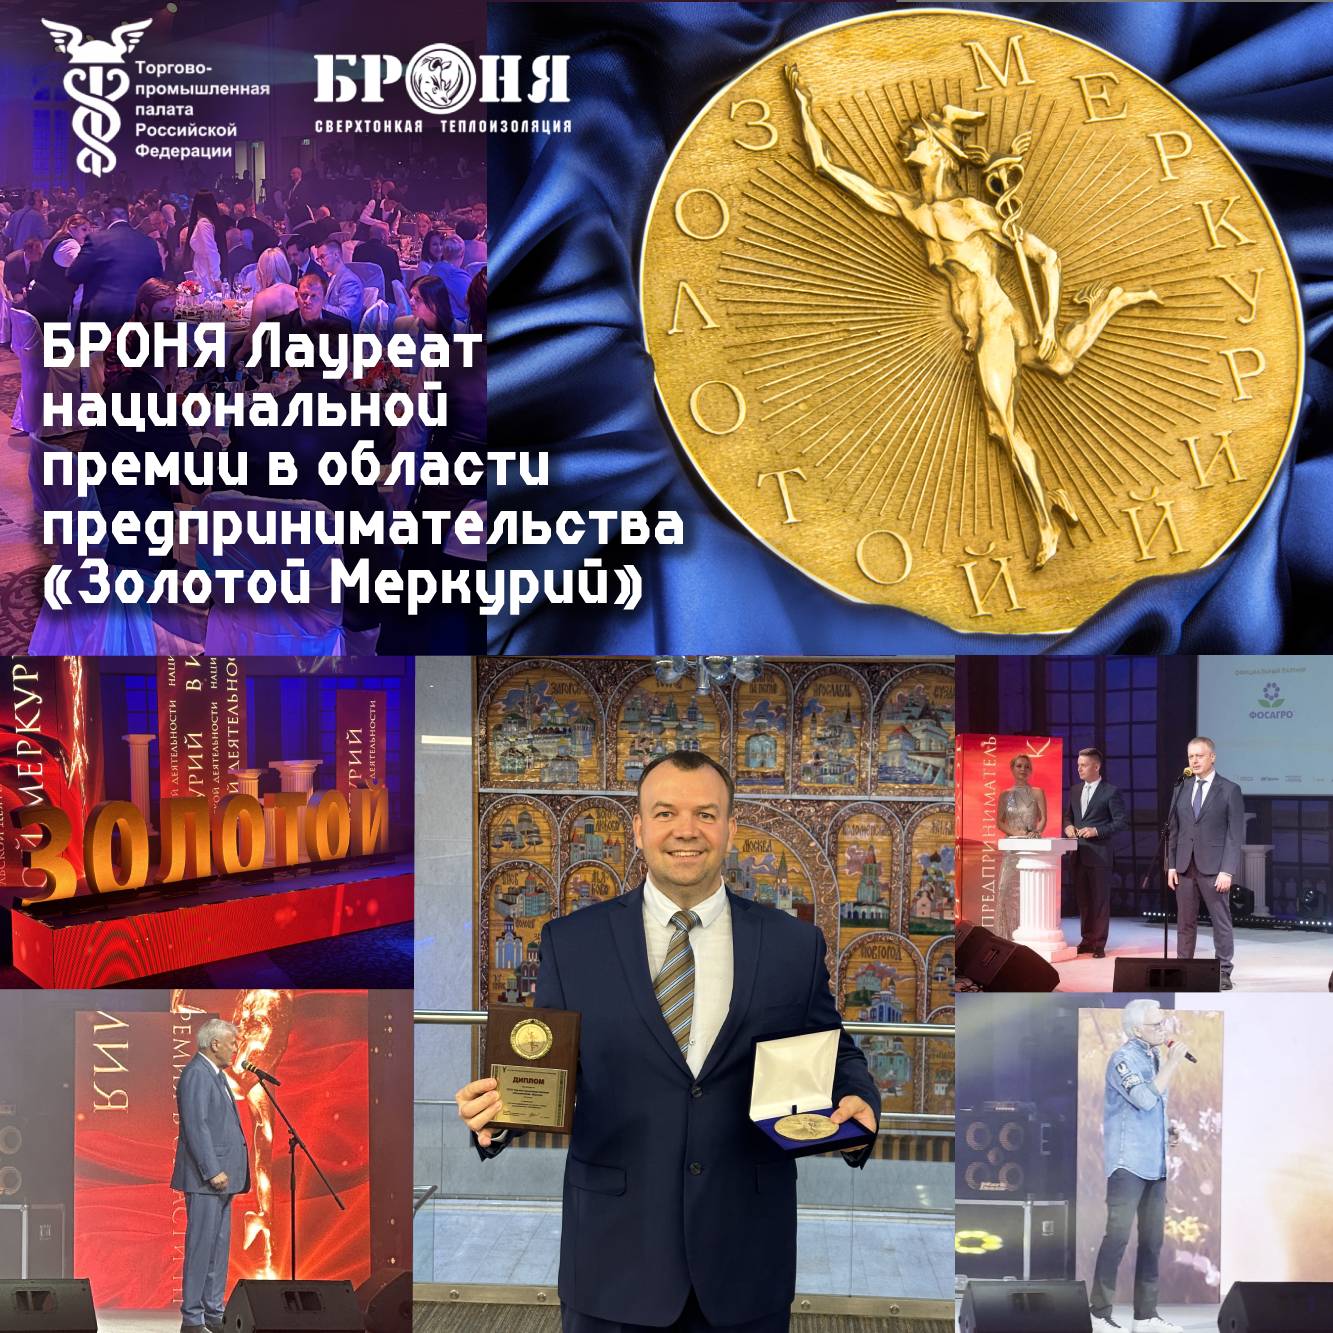 Congratulations! "BRONYA" is the winner of the national award in the field of entrepreneurship "Golden Mercury" in the nomination "The best exporting enterprise in the field of industrial production". (Photos , Videos)